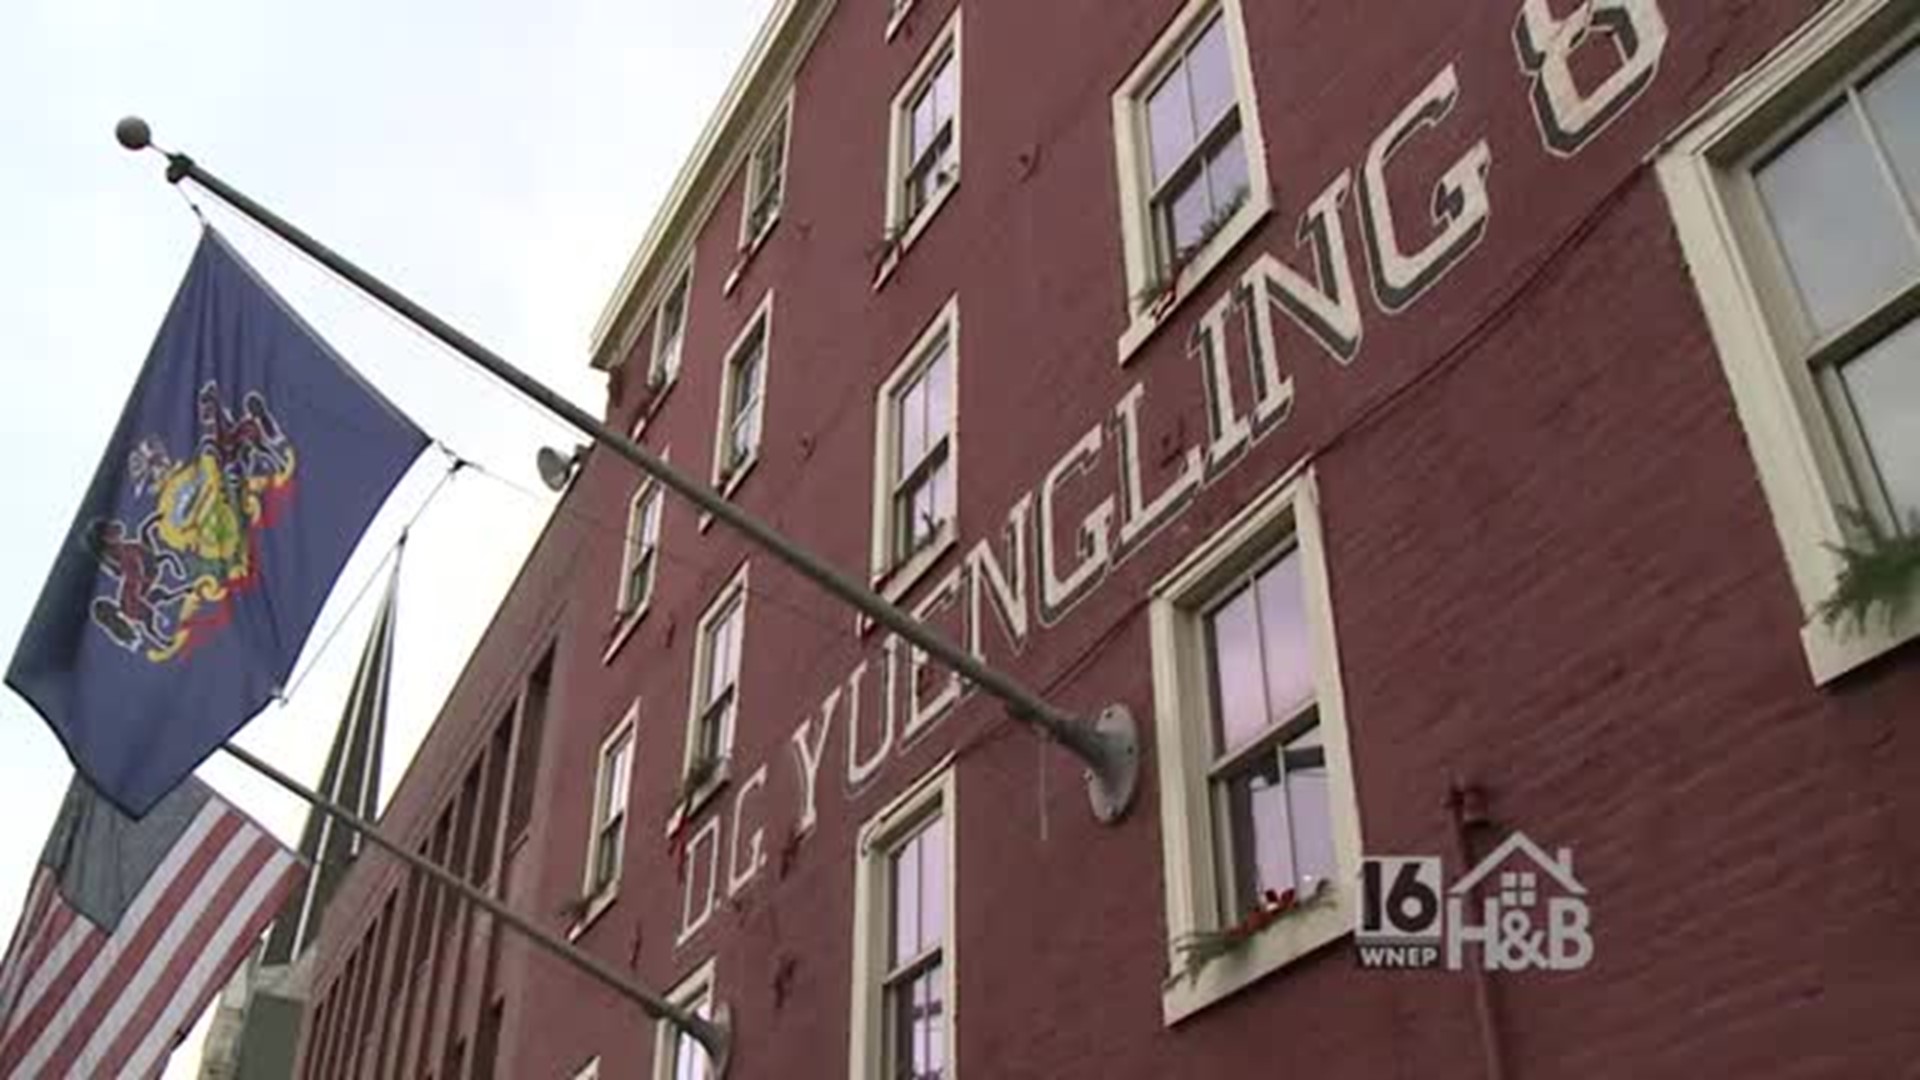 Ford Great Escape: Yuengling Brewery